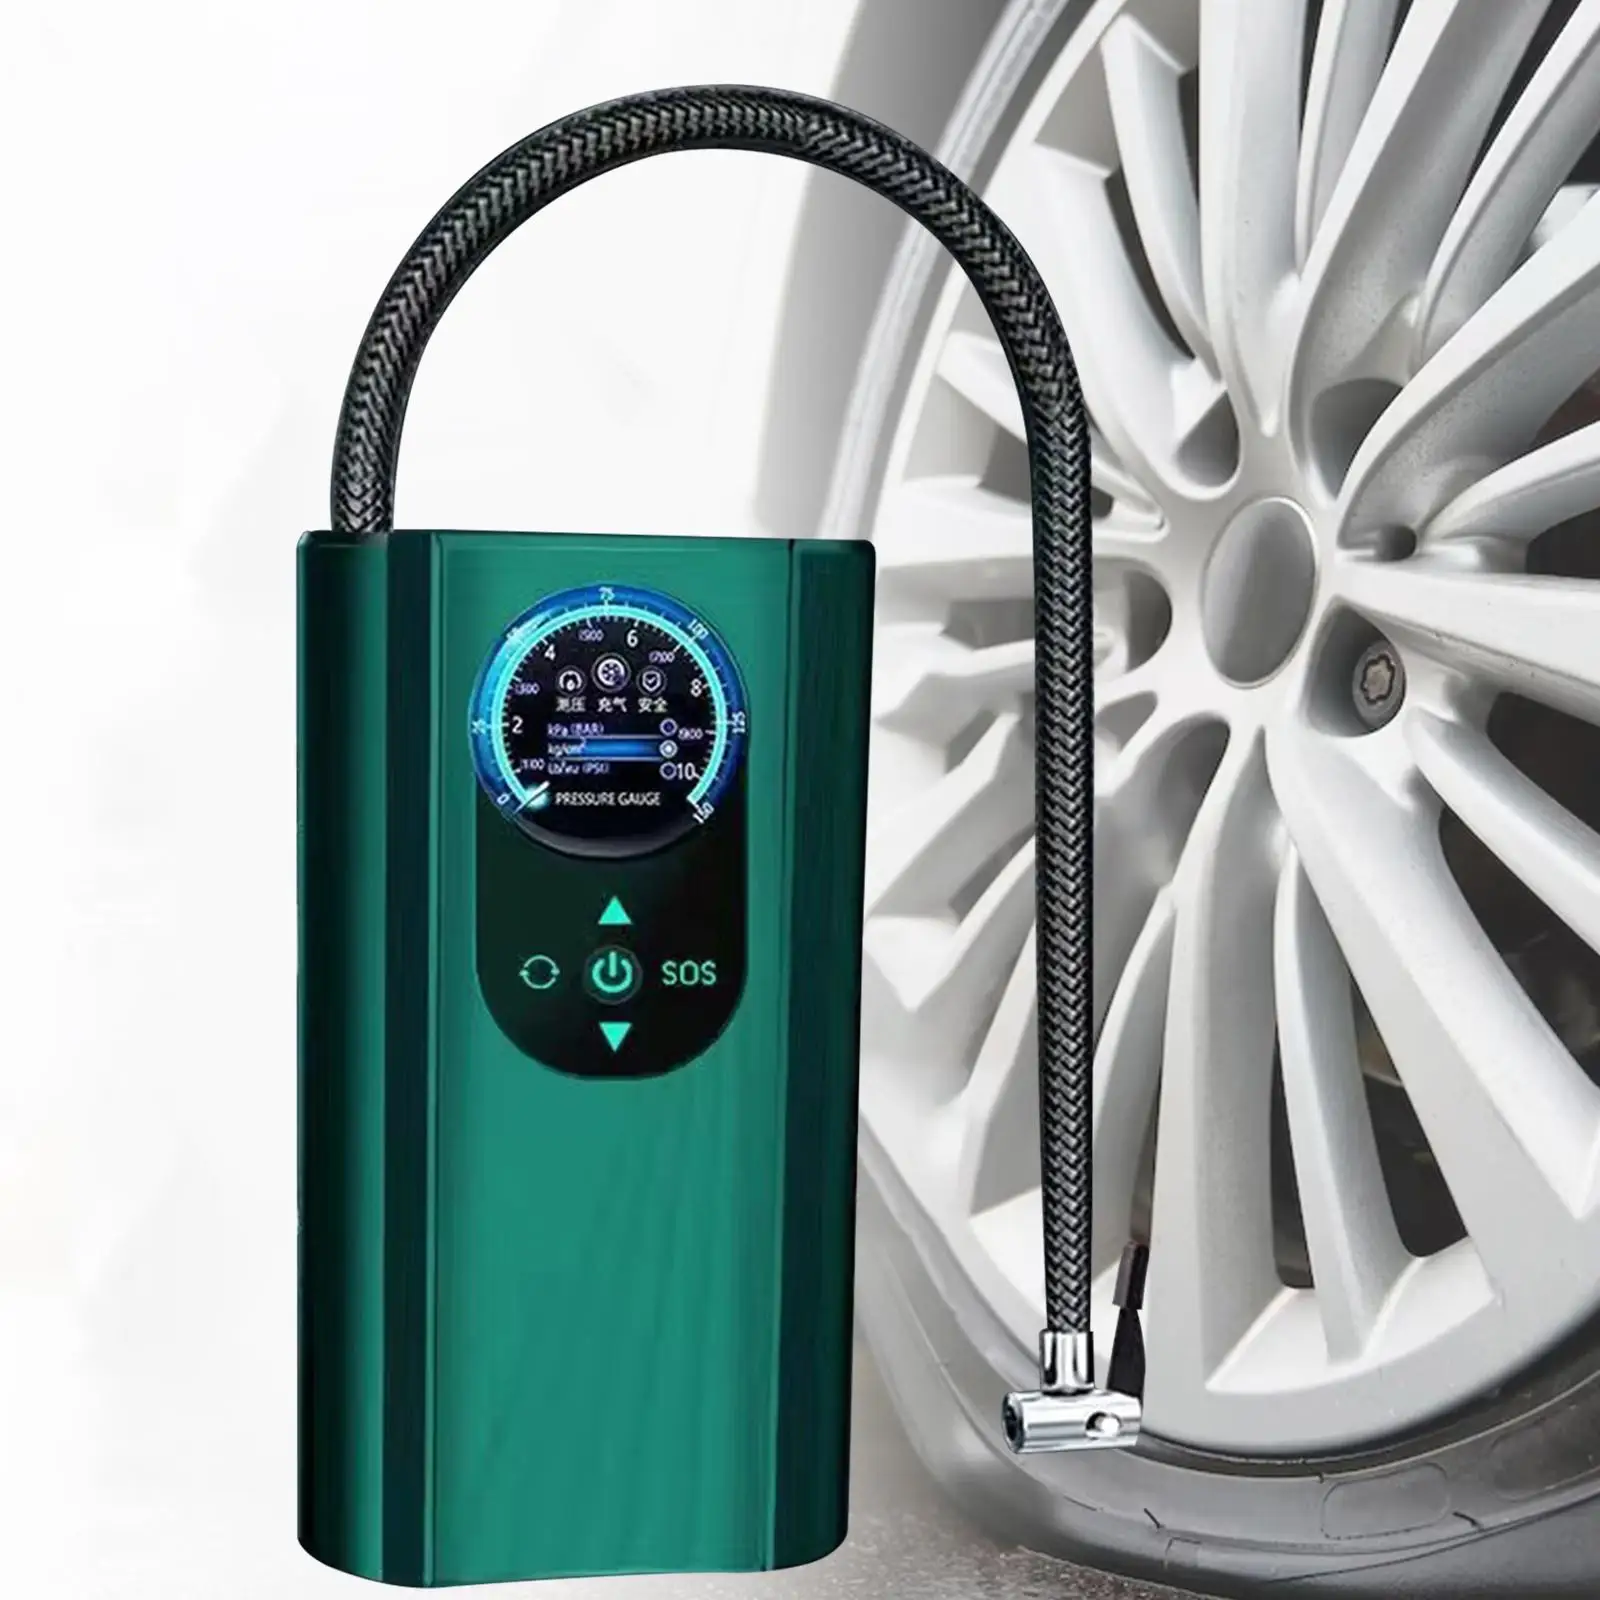 Portable Air Compressor Auto Accessories Multipurpose Fast Electric Tire Pump Bike Pump for Bicycle Motorcycle SUV Car Ball